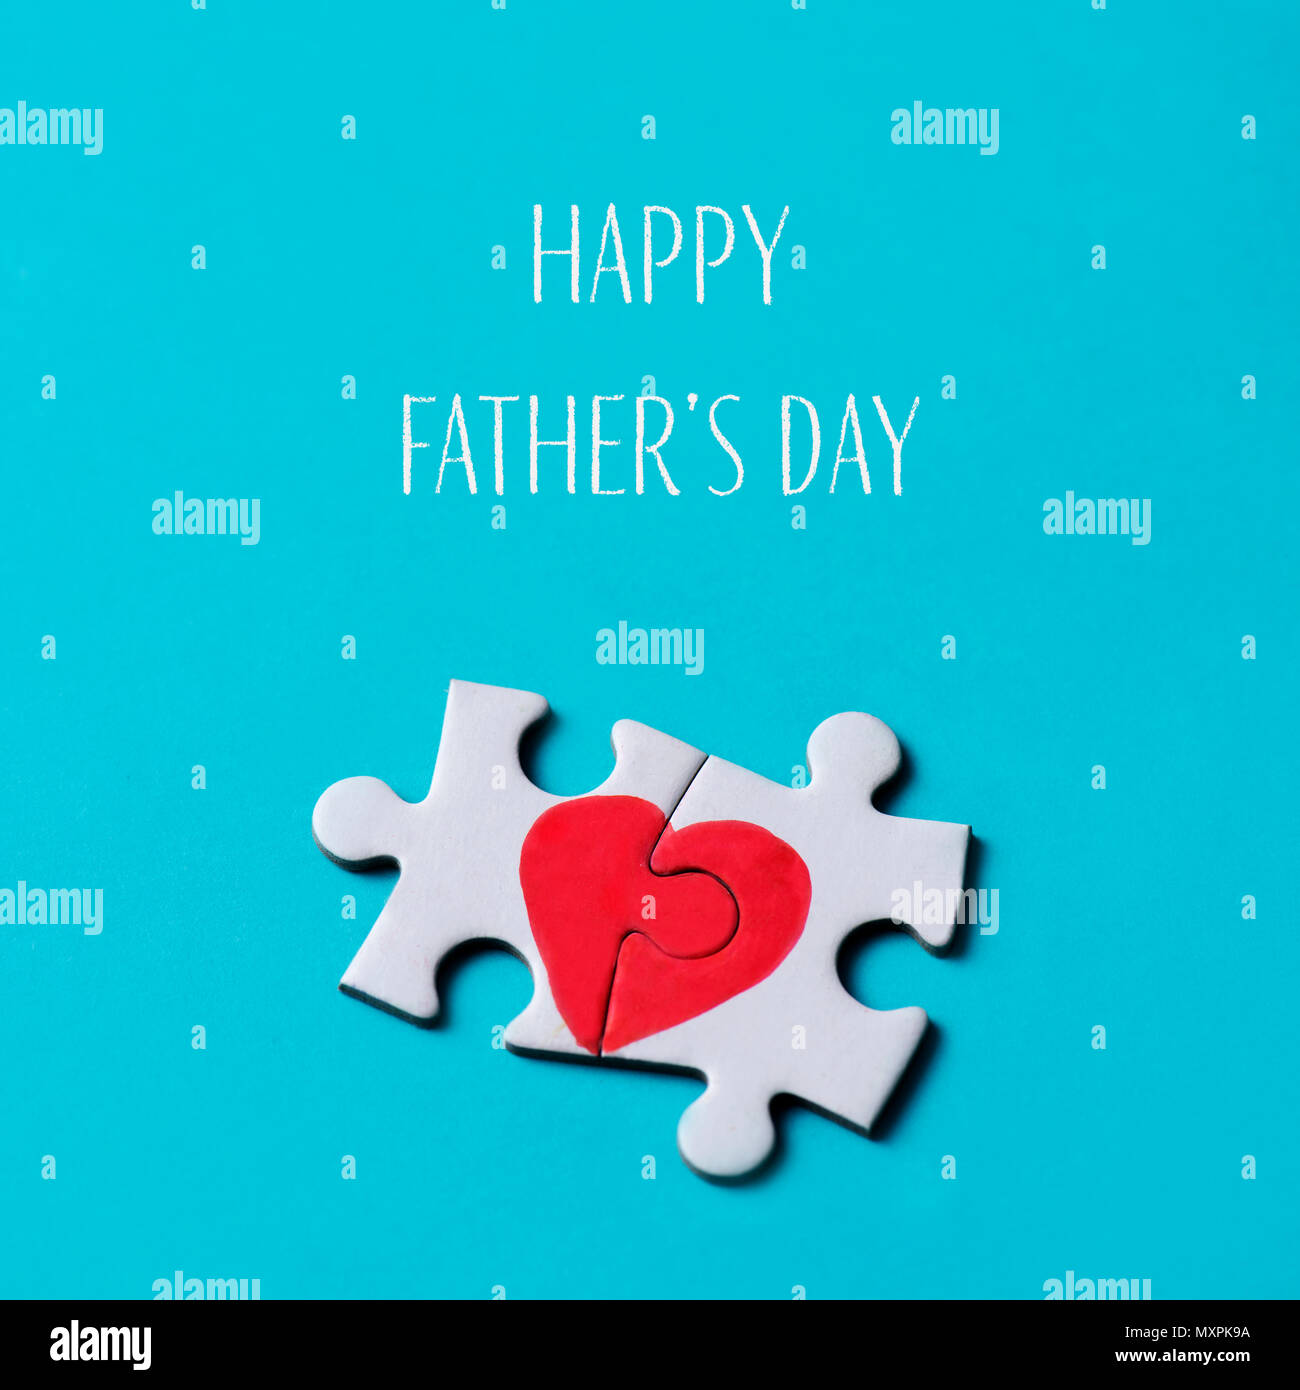 two pieces of a puzzle forming a heart and the text happy fathers day on a blue background Stock Photo